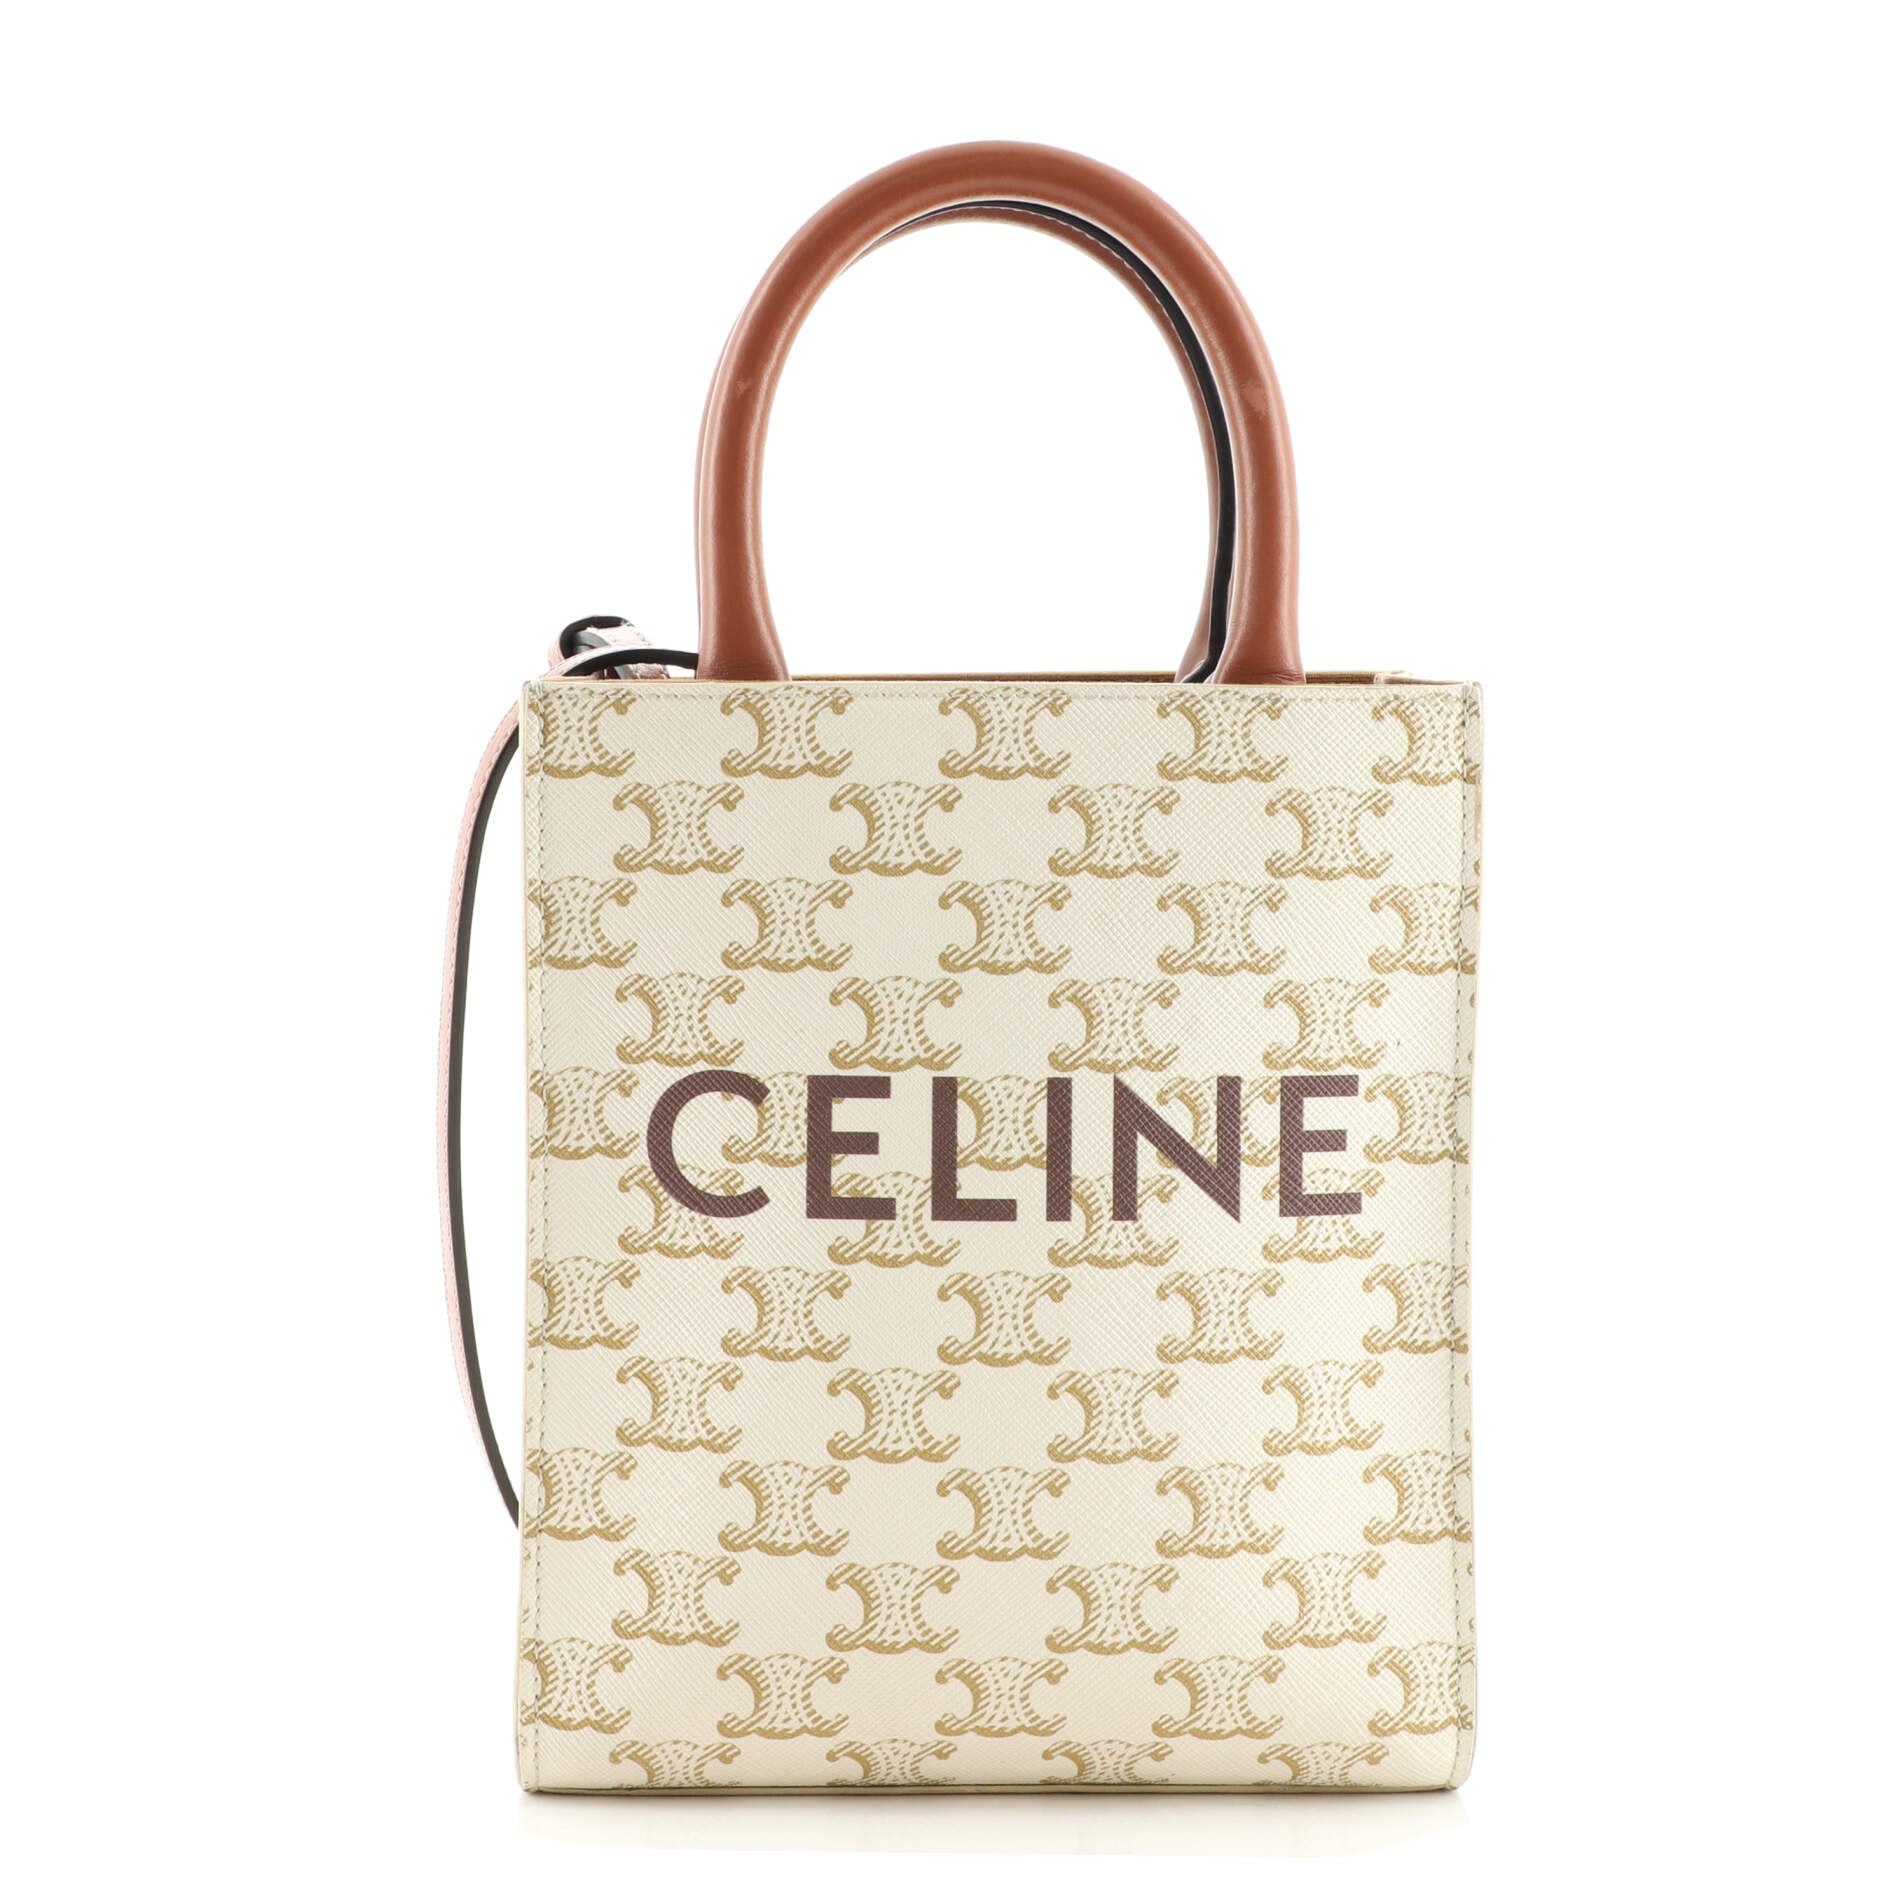 Celine - Soft Luggage 45 in Triomphe Canvas and Calfskin Leather - Brown